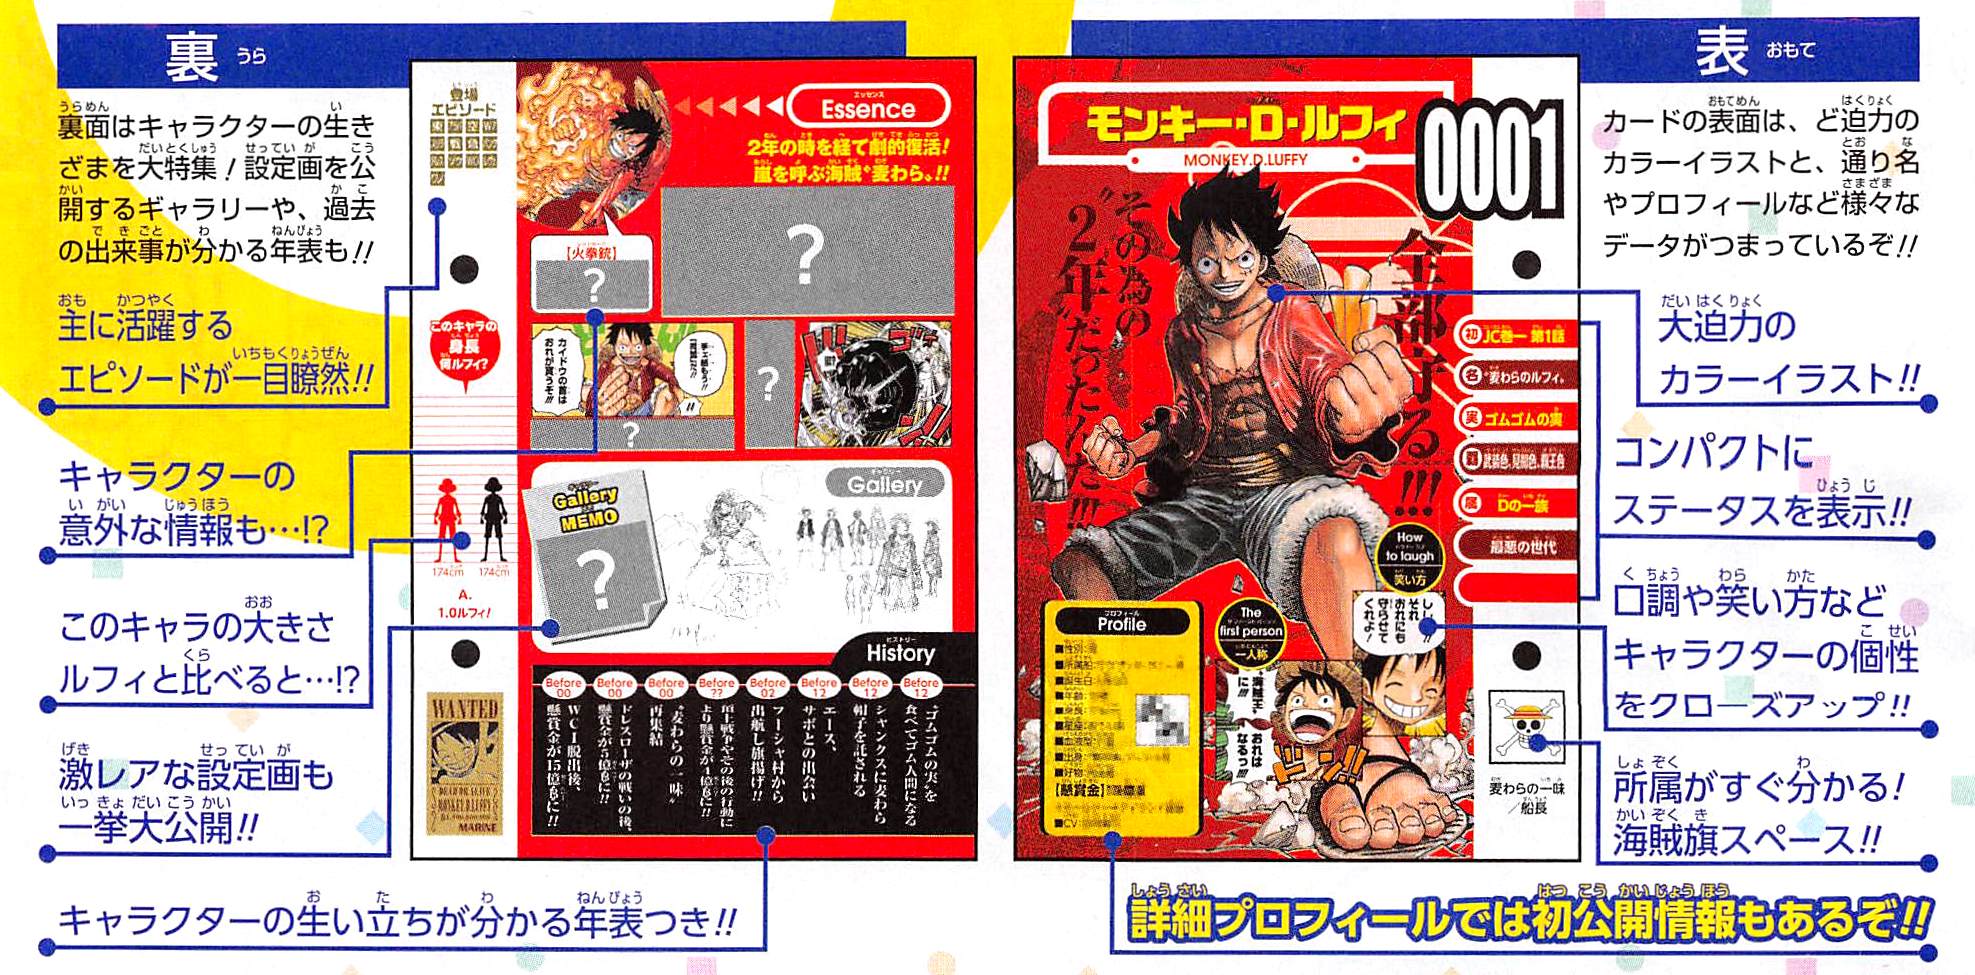 Vivre Card One Piece Visual Dictionary New One Piece Databook On Sale 4th September